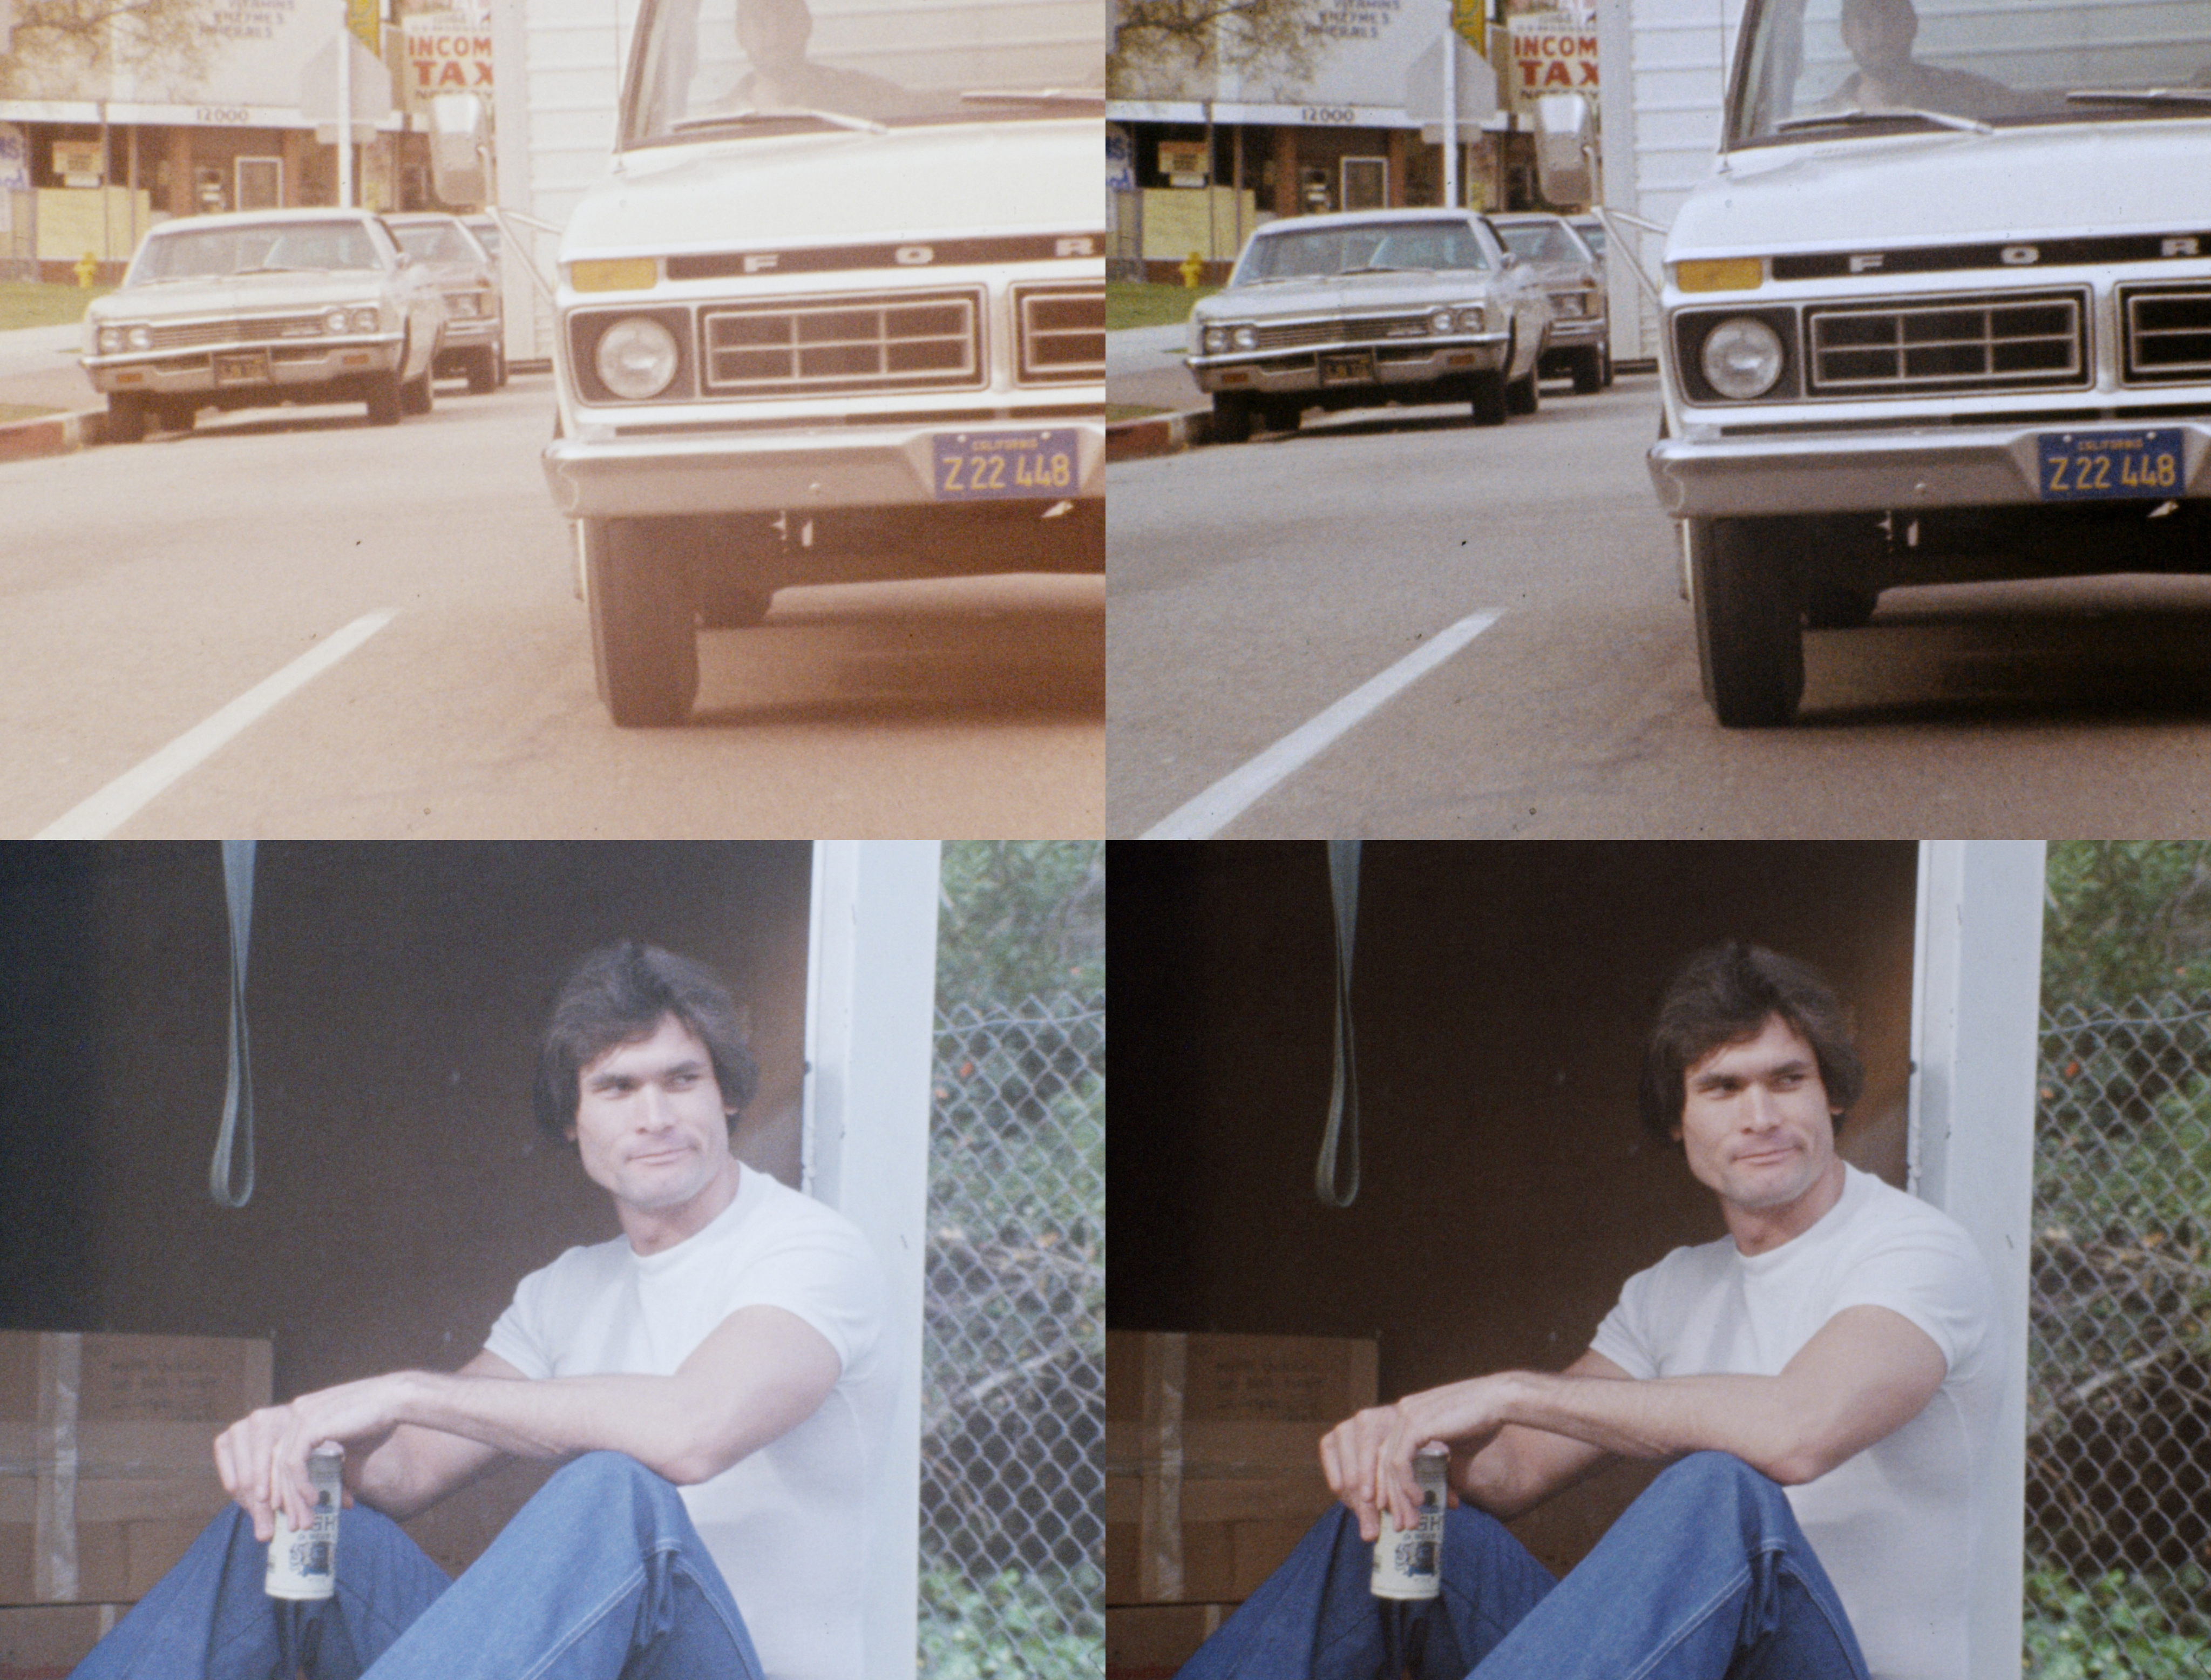 Hot Truckin' before/after color correction images from upcoming restoration